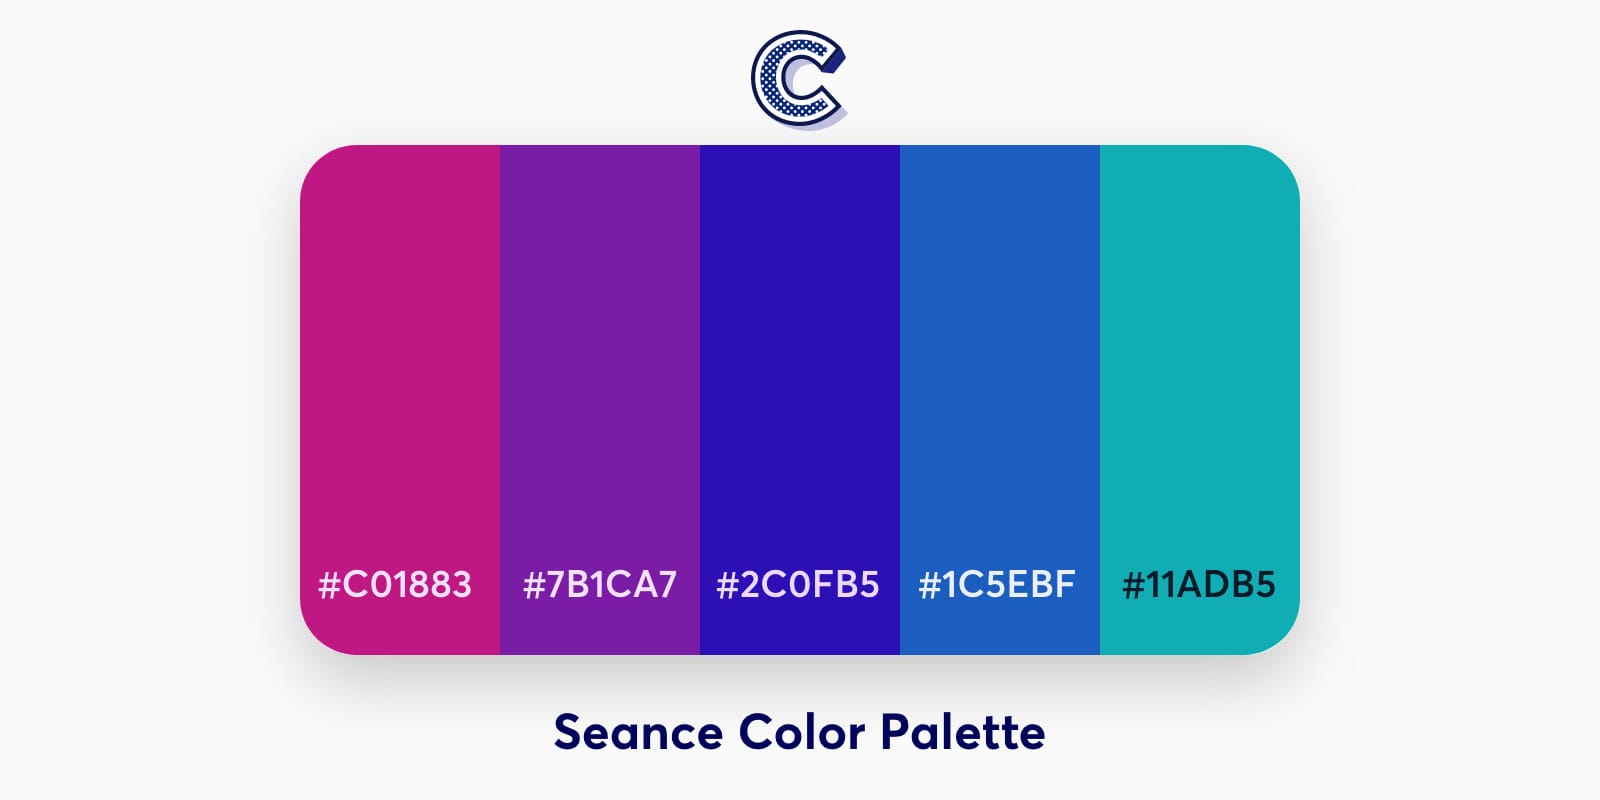 the featured image of seance color palette